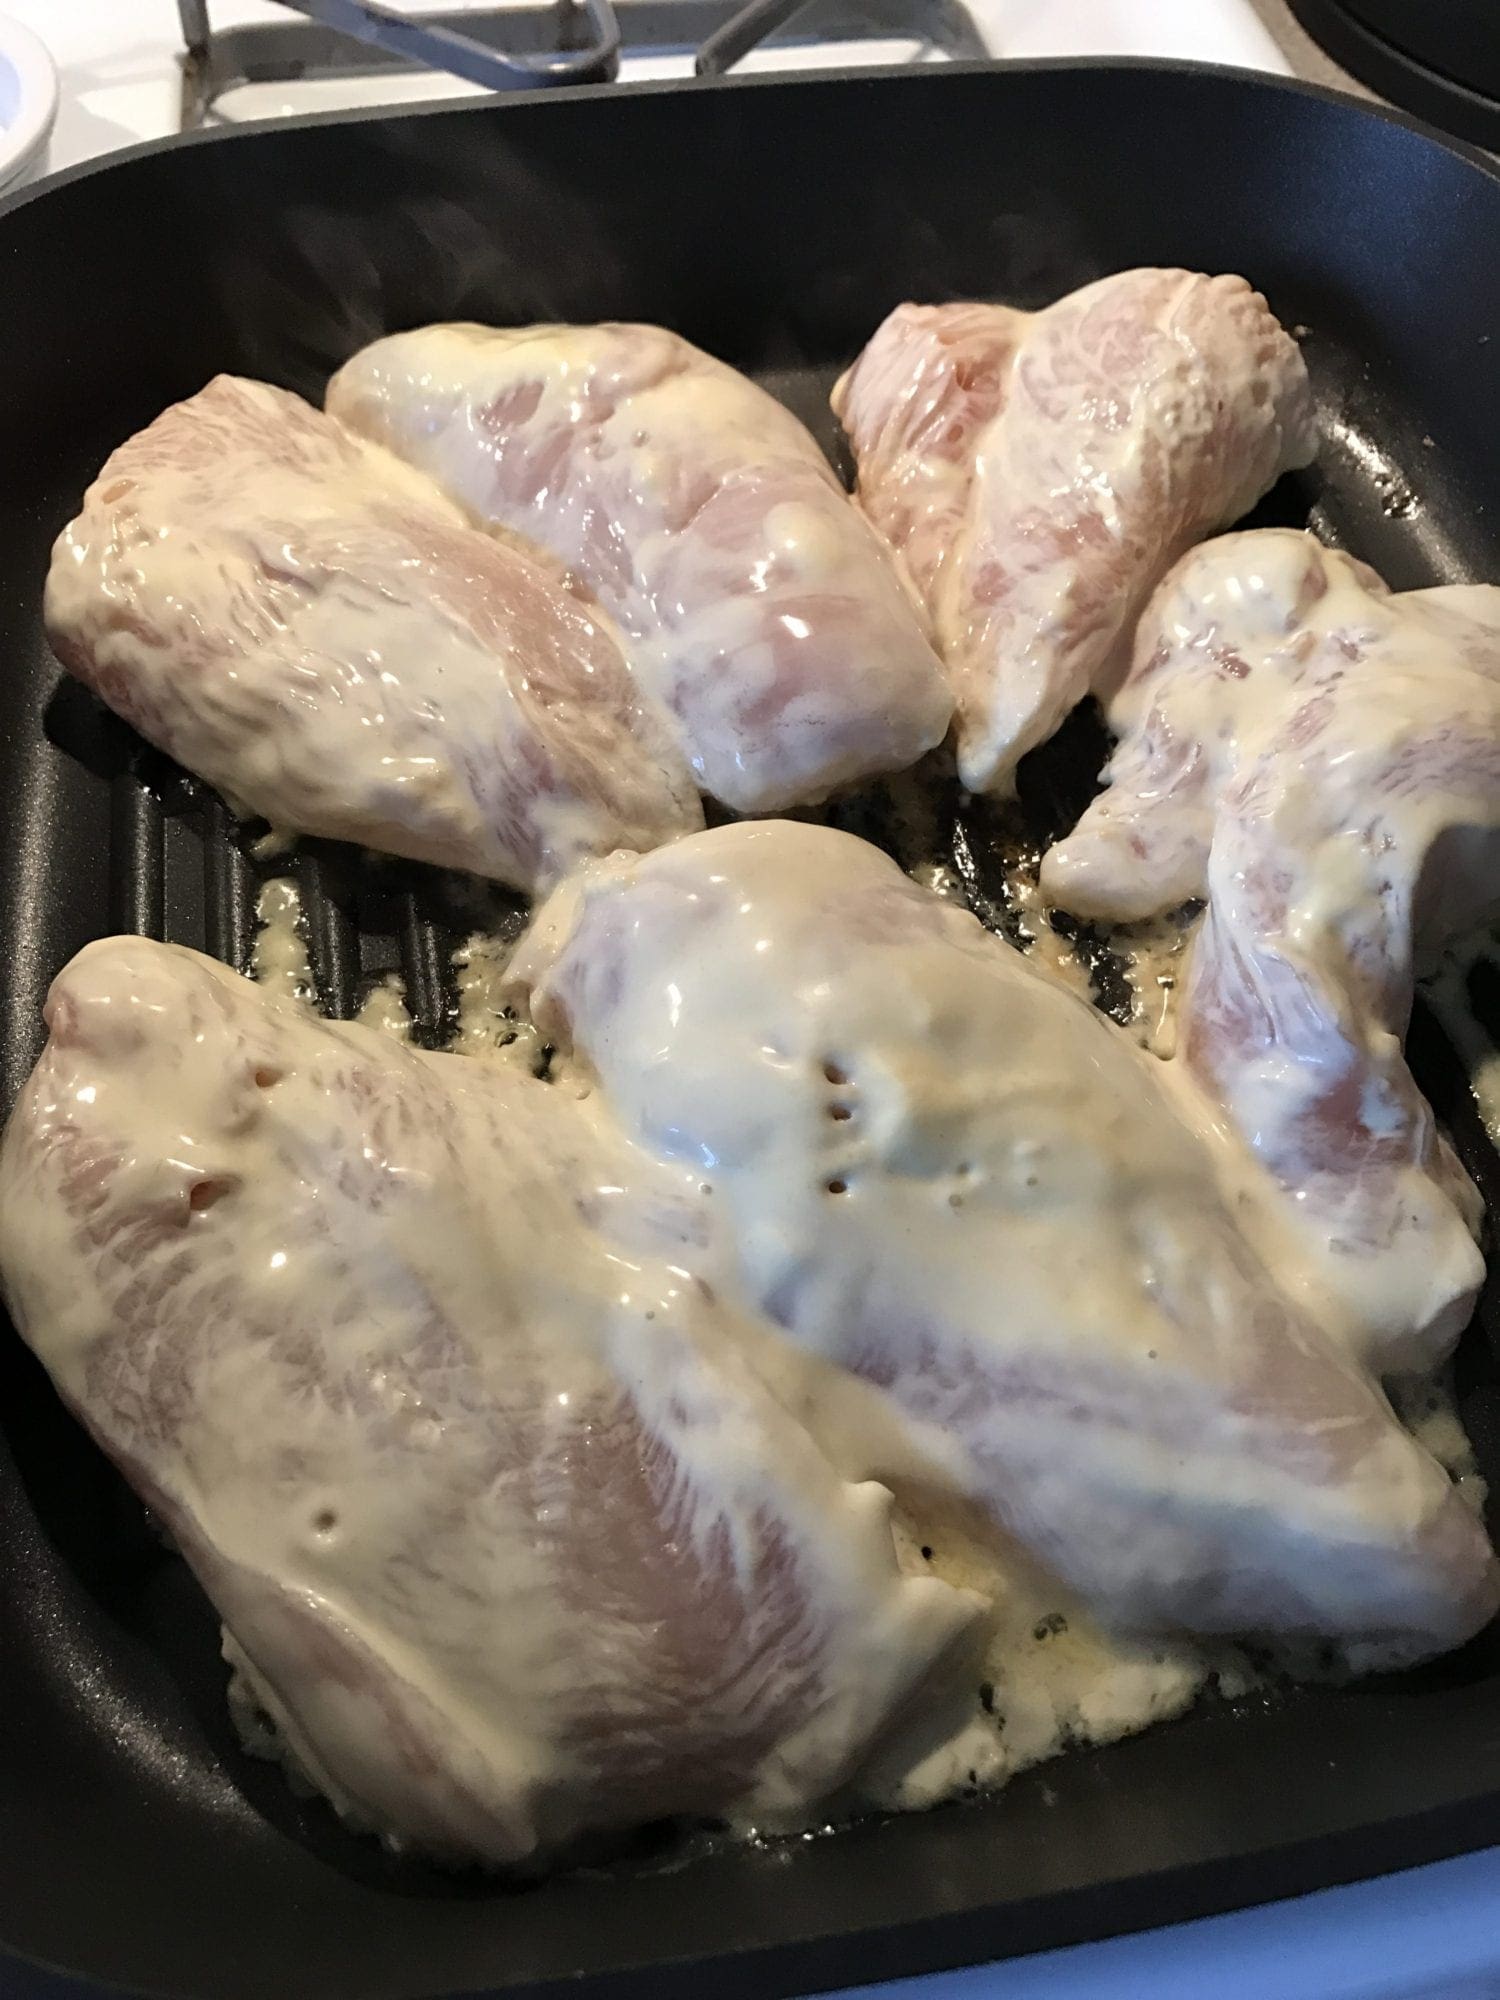 Honey Mustard Grilled Chicken uses a mayo mixture for a quick and easy chicken recipe.